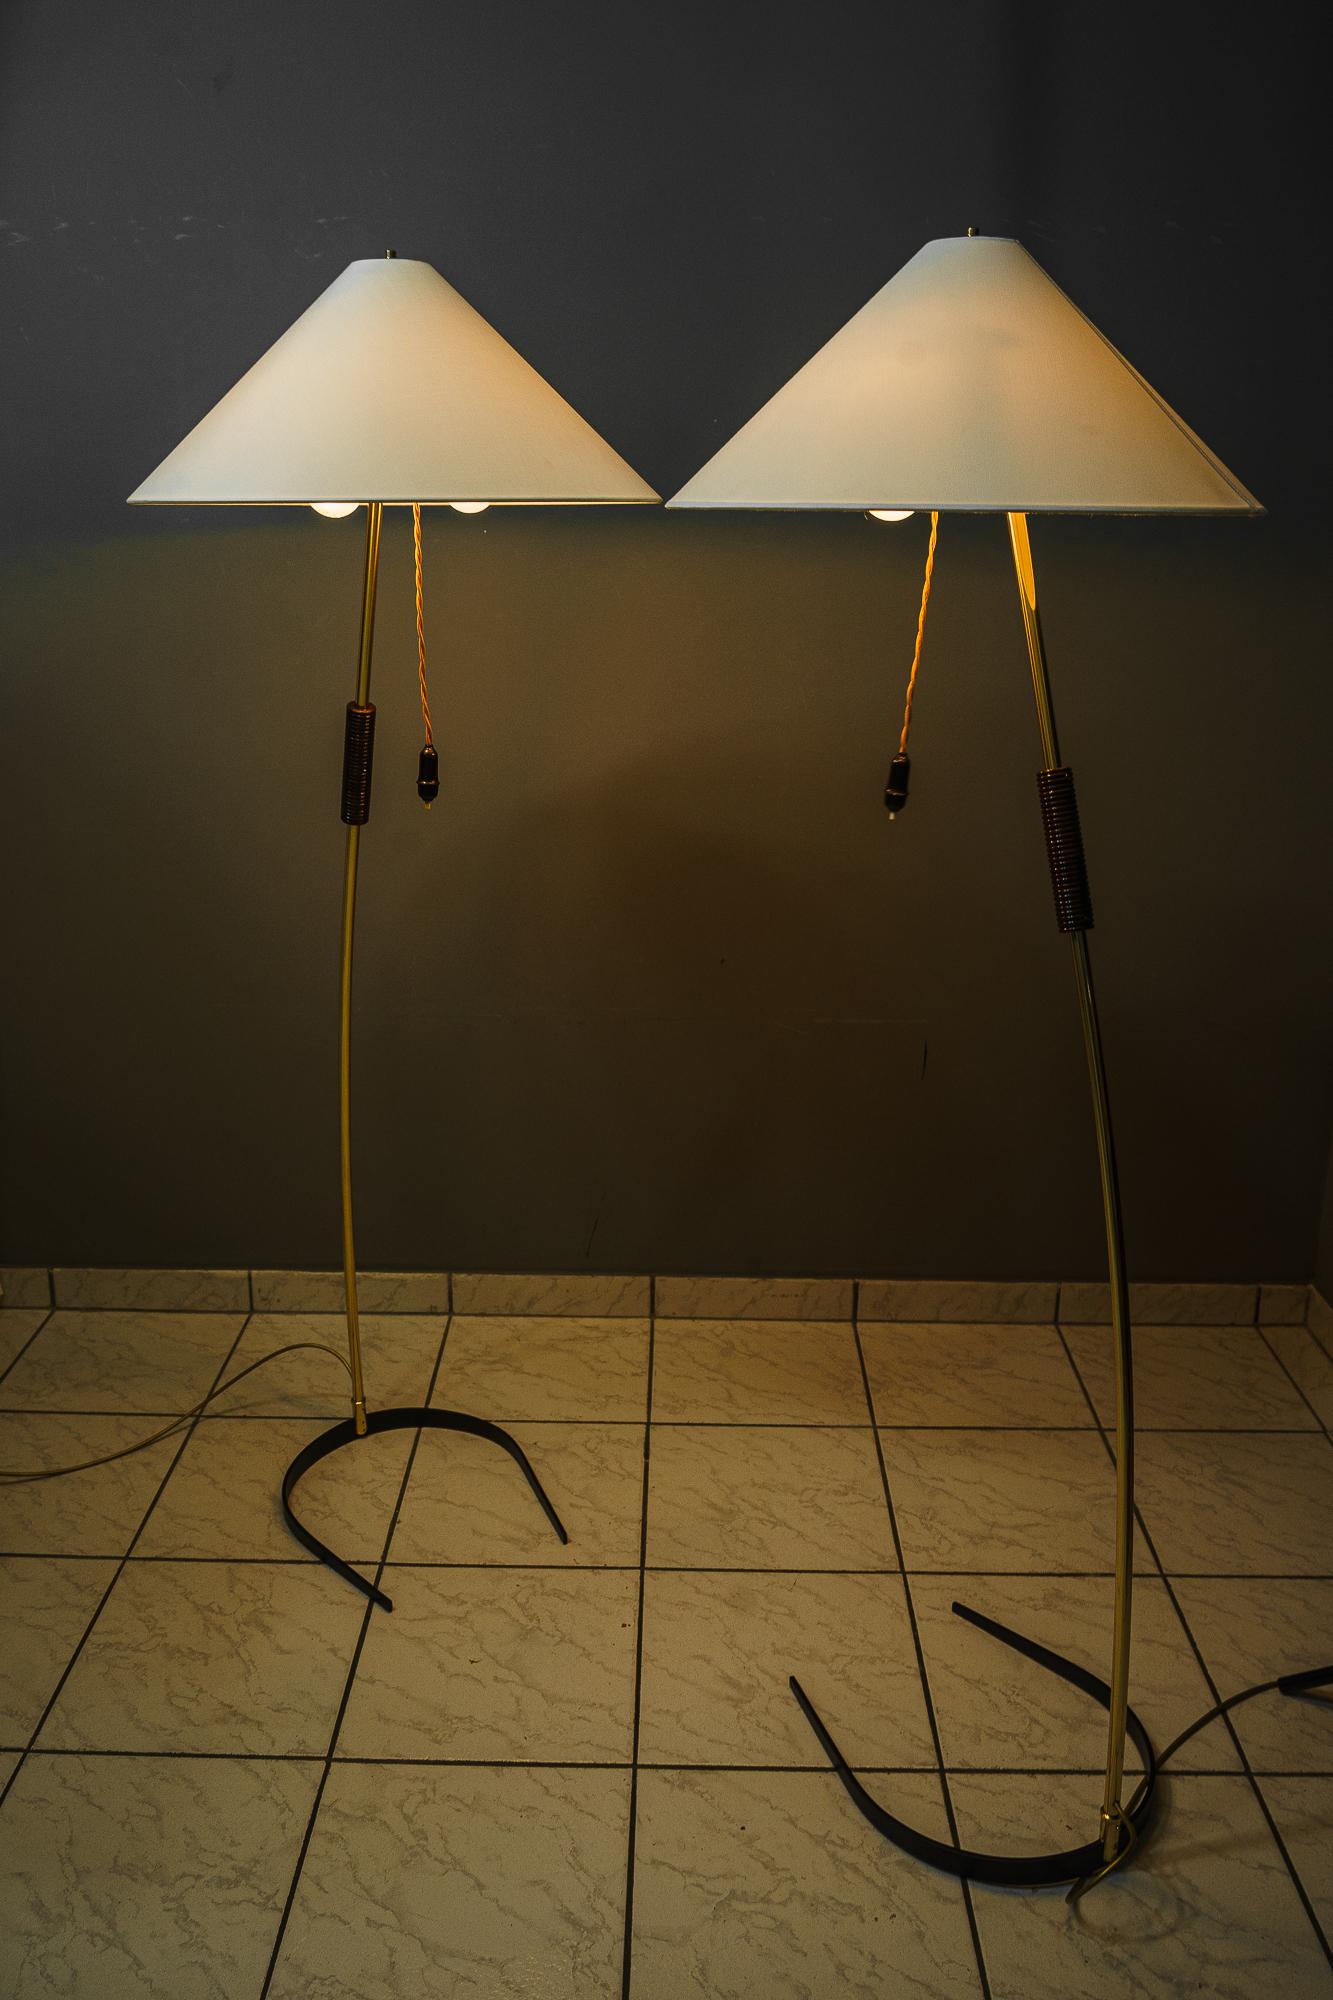 2x Rupert Nikoll Floor Lamps with Wood Handle, circa 1950s For Sale 9